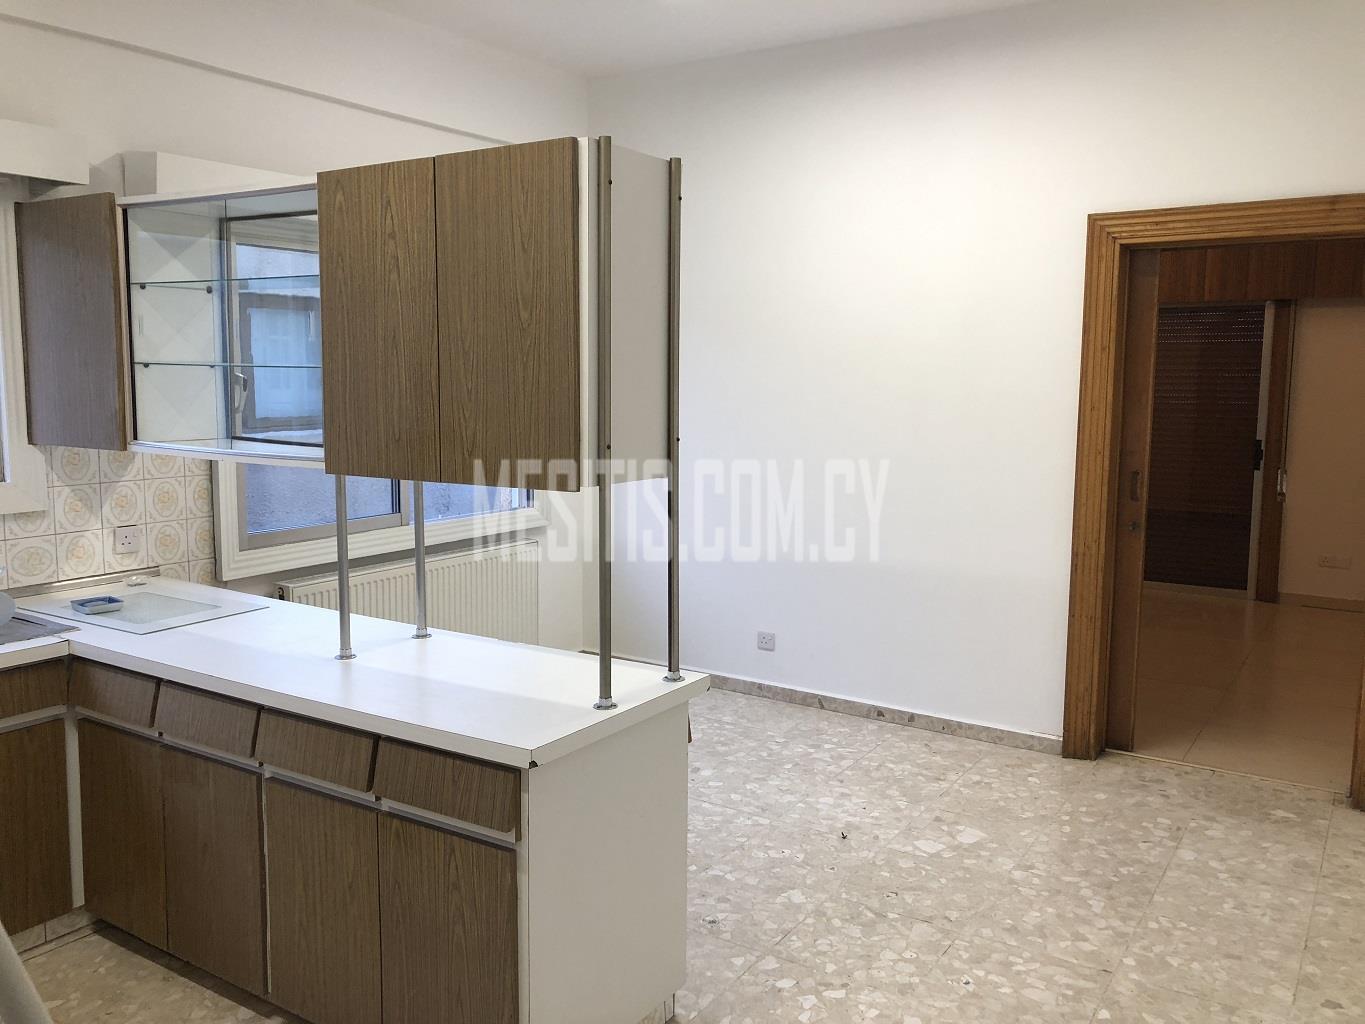 3 Bedroom Apartment For Rent In Strovolos Near Stavrou Avenue #3308-8